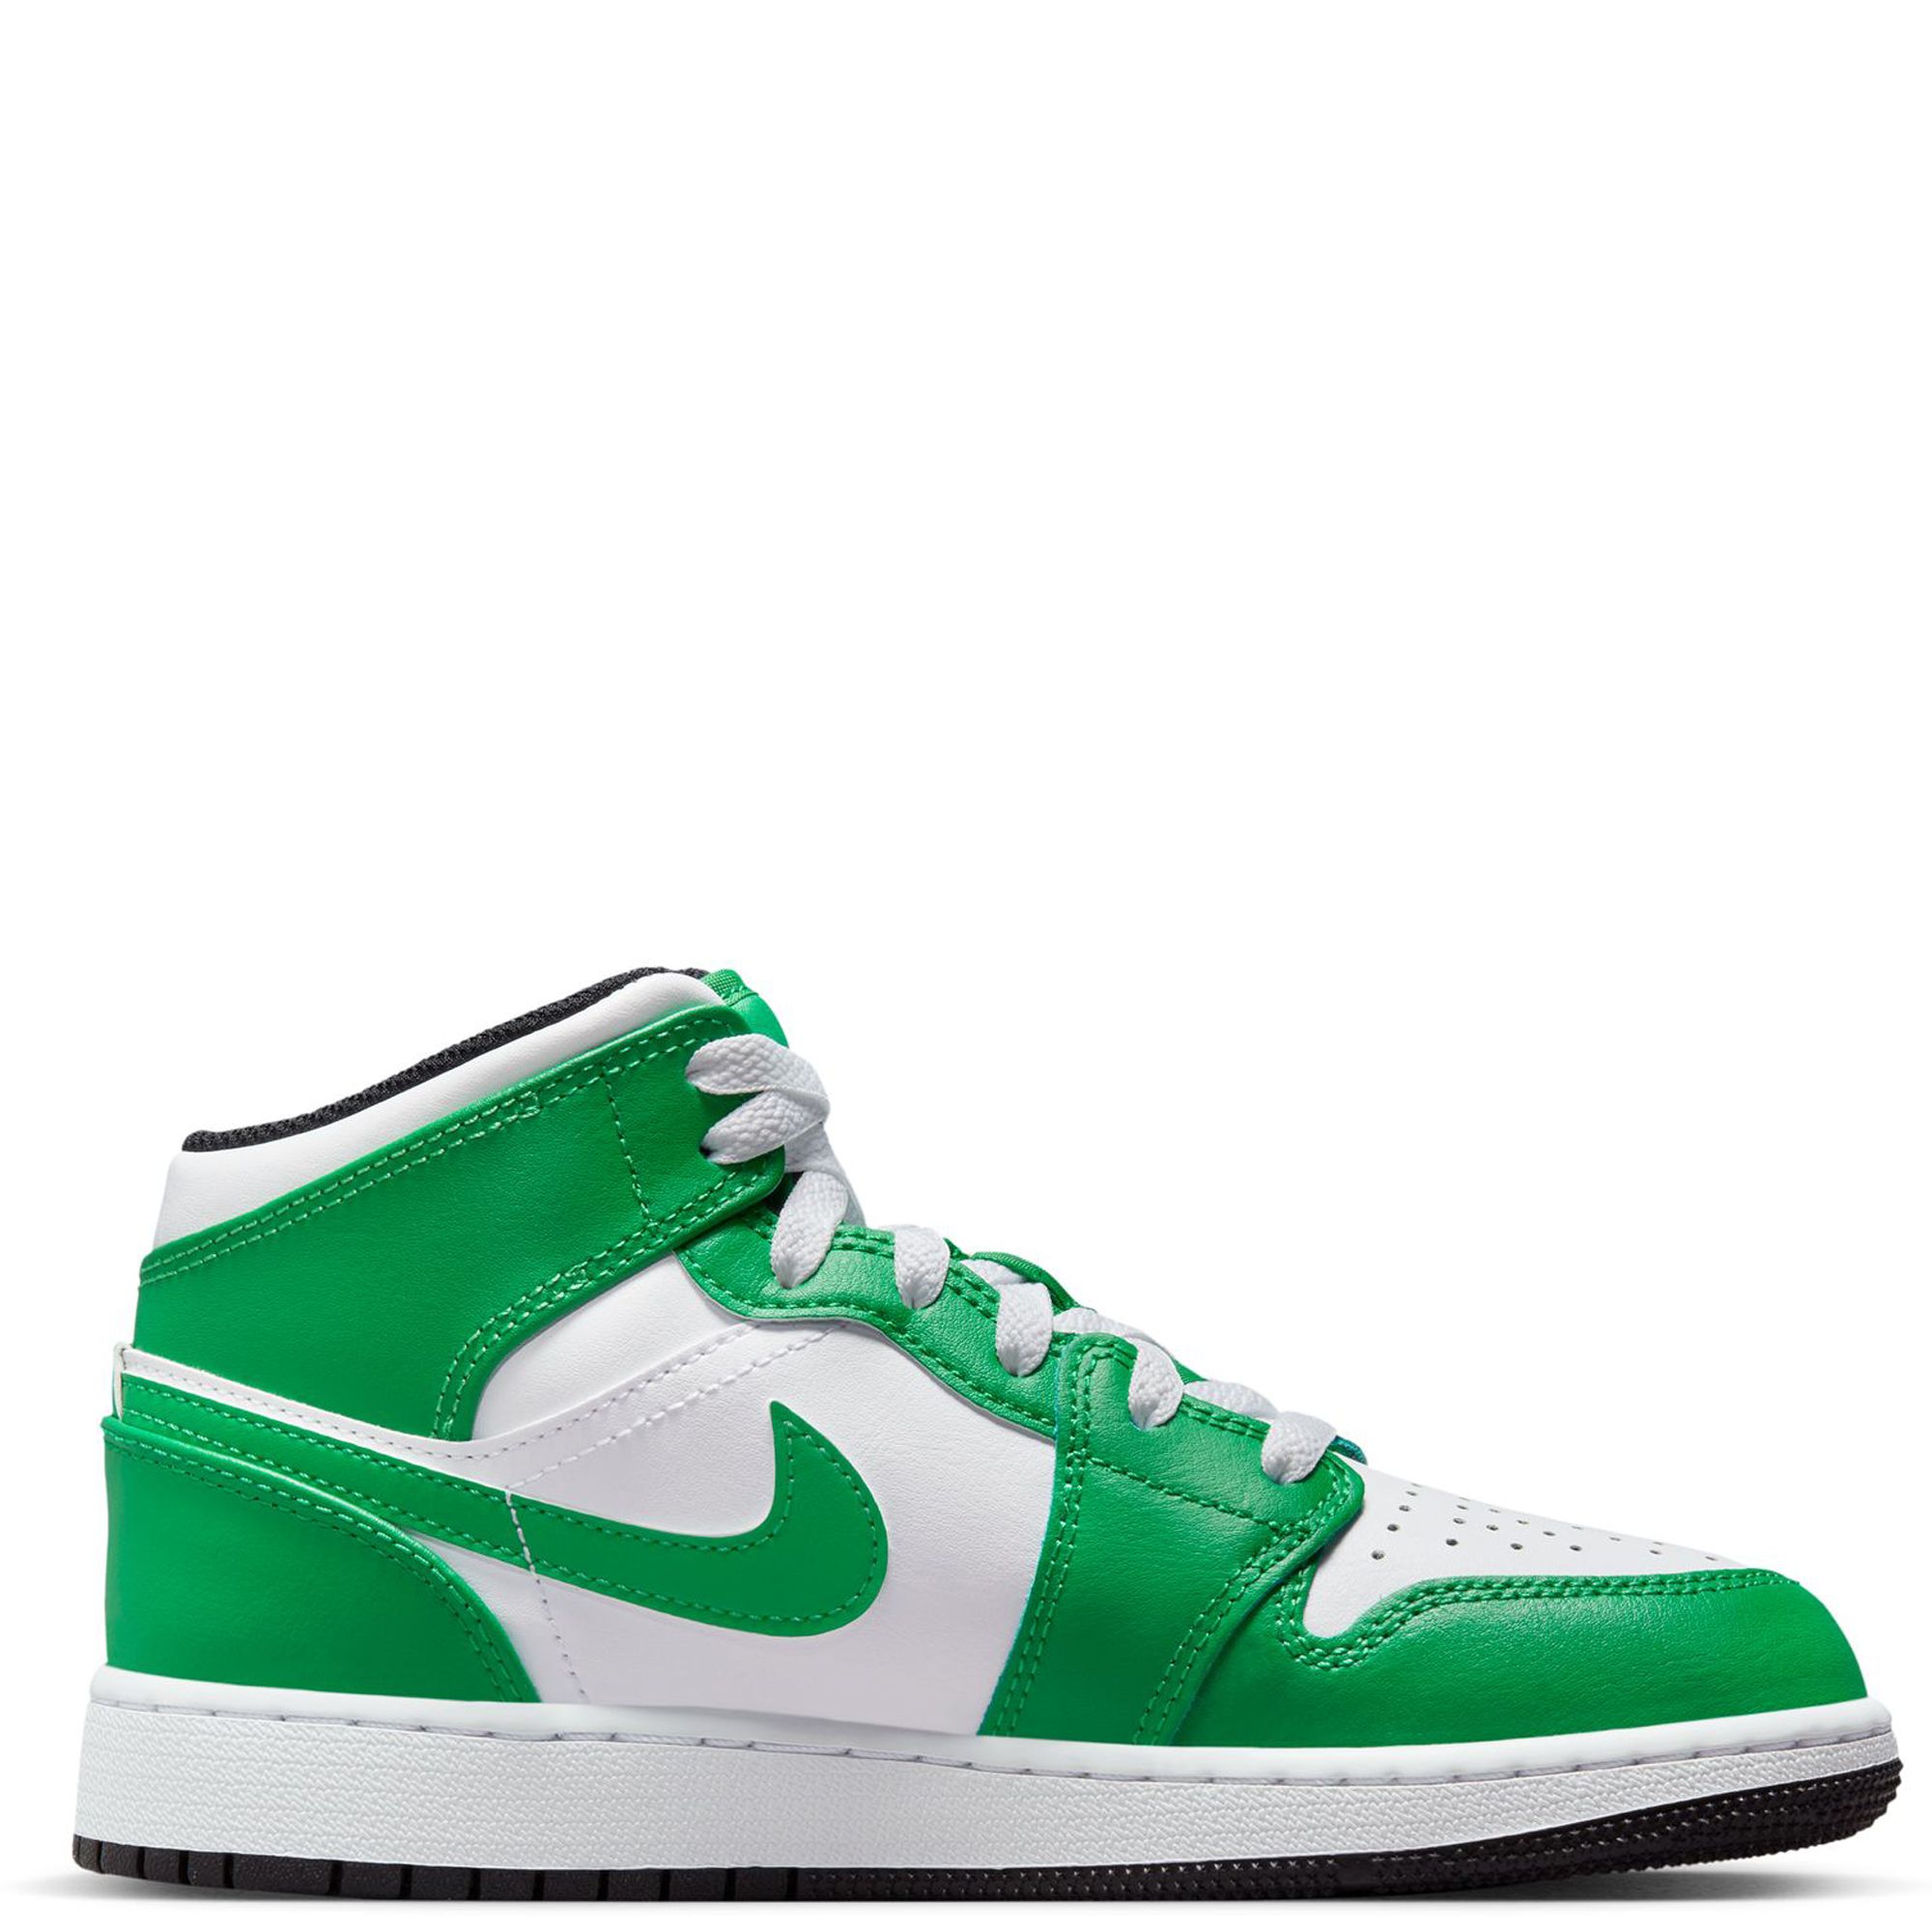 Nike Air Jordan 1 Mid (GS) Lucky Green White DQ8423-301 Size 5Y - 7Y Shoes  #109B